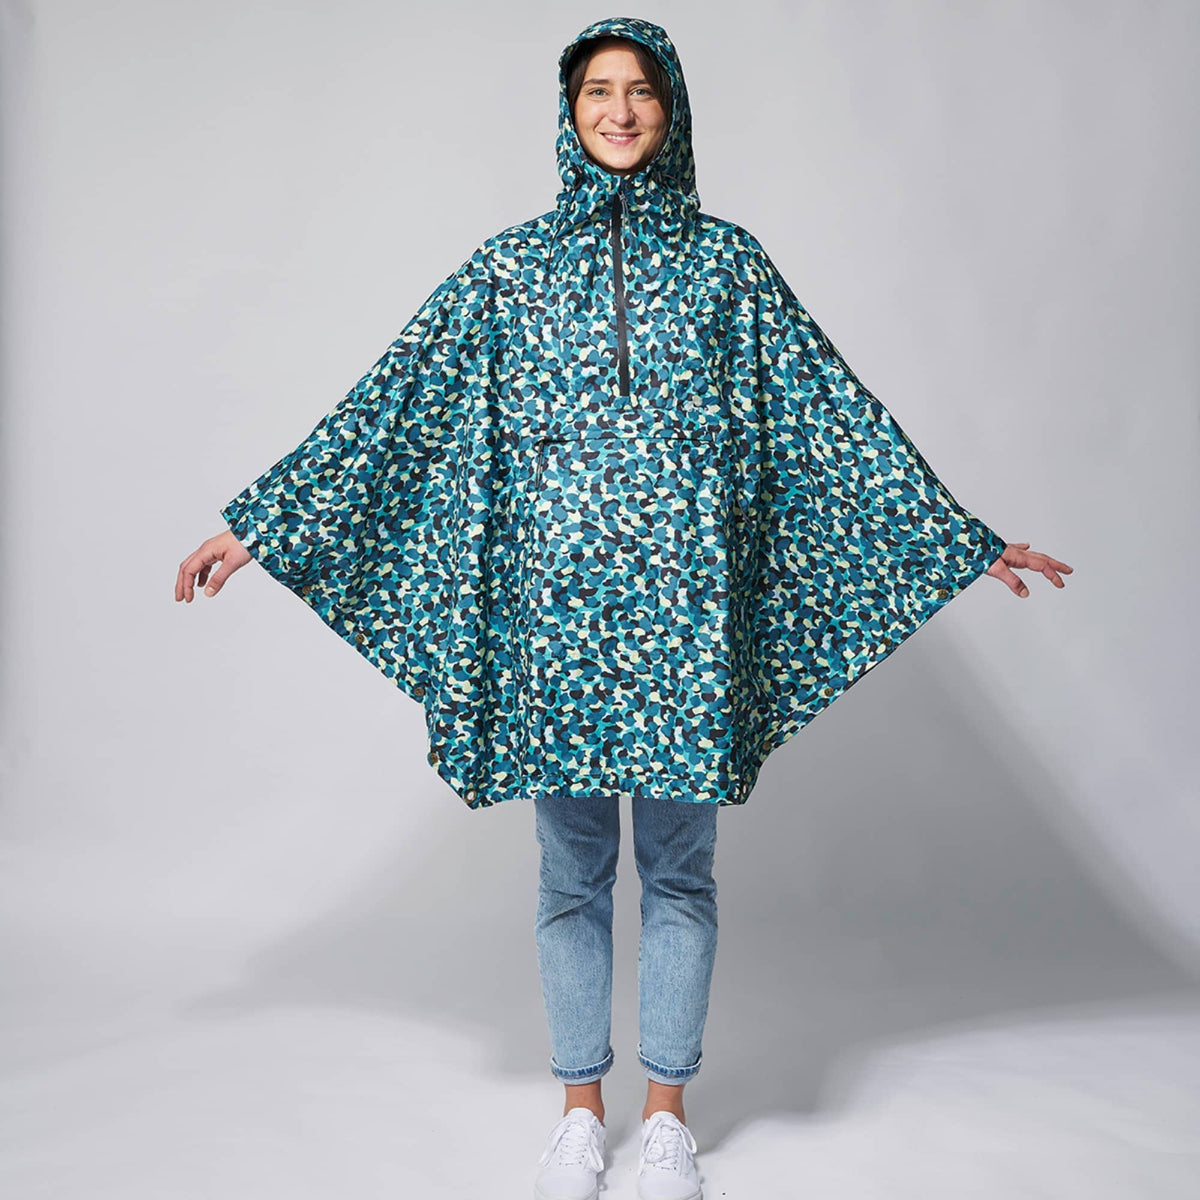 VOITED Rain Poncho - Water-Resistant & Packable - An Tracks Rainwear VOITED 